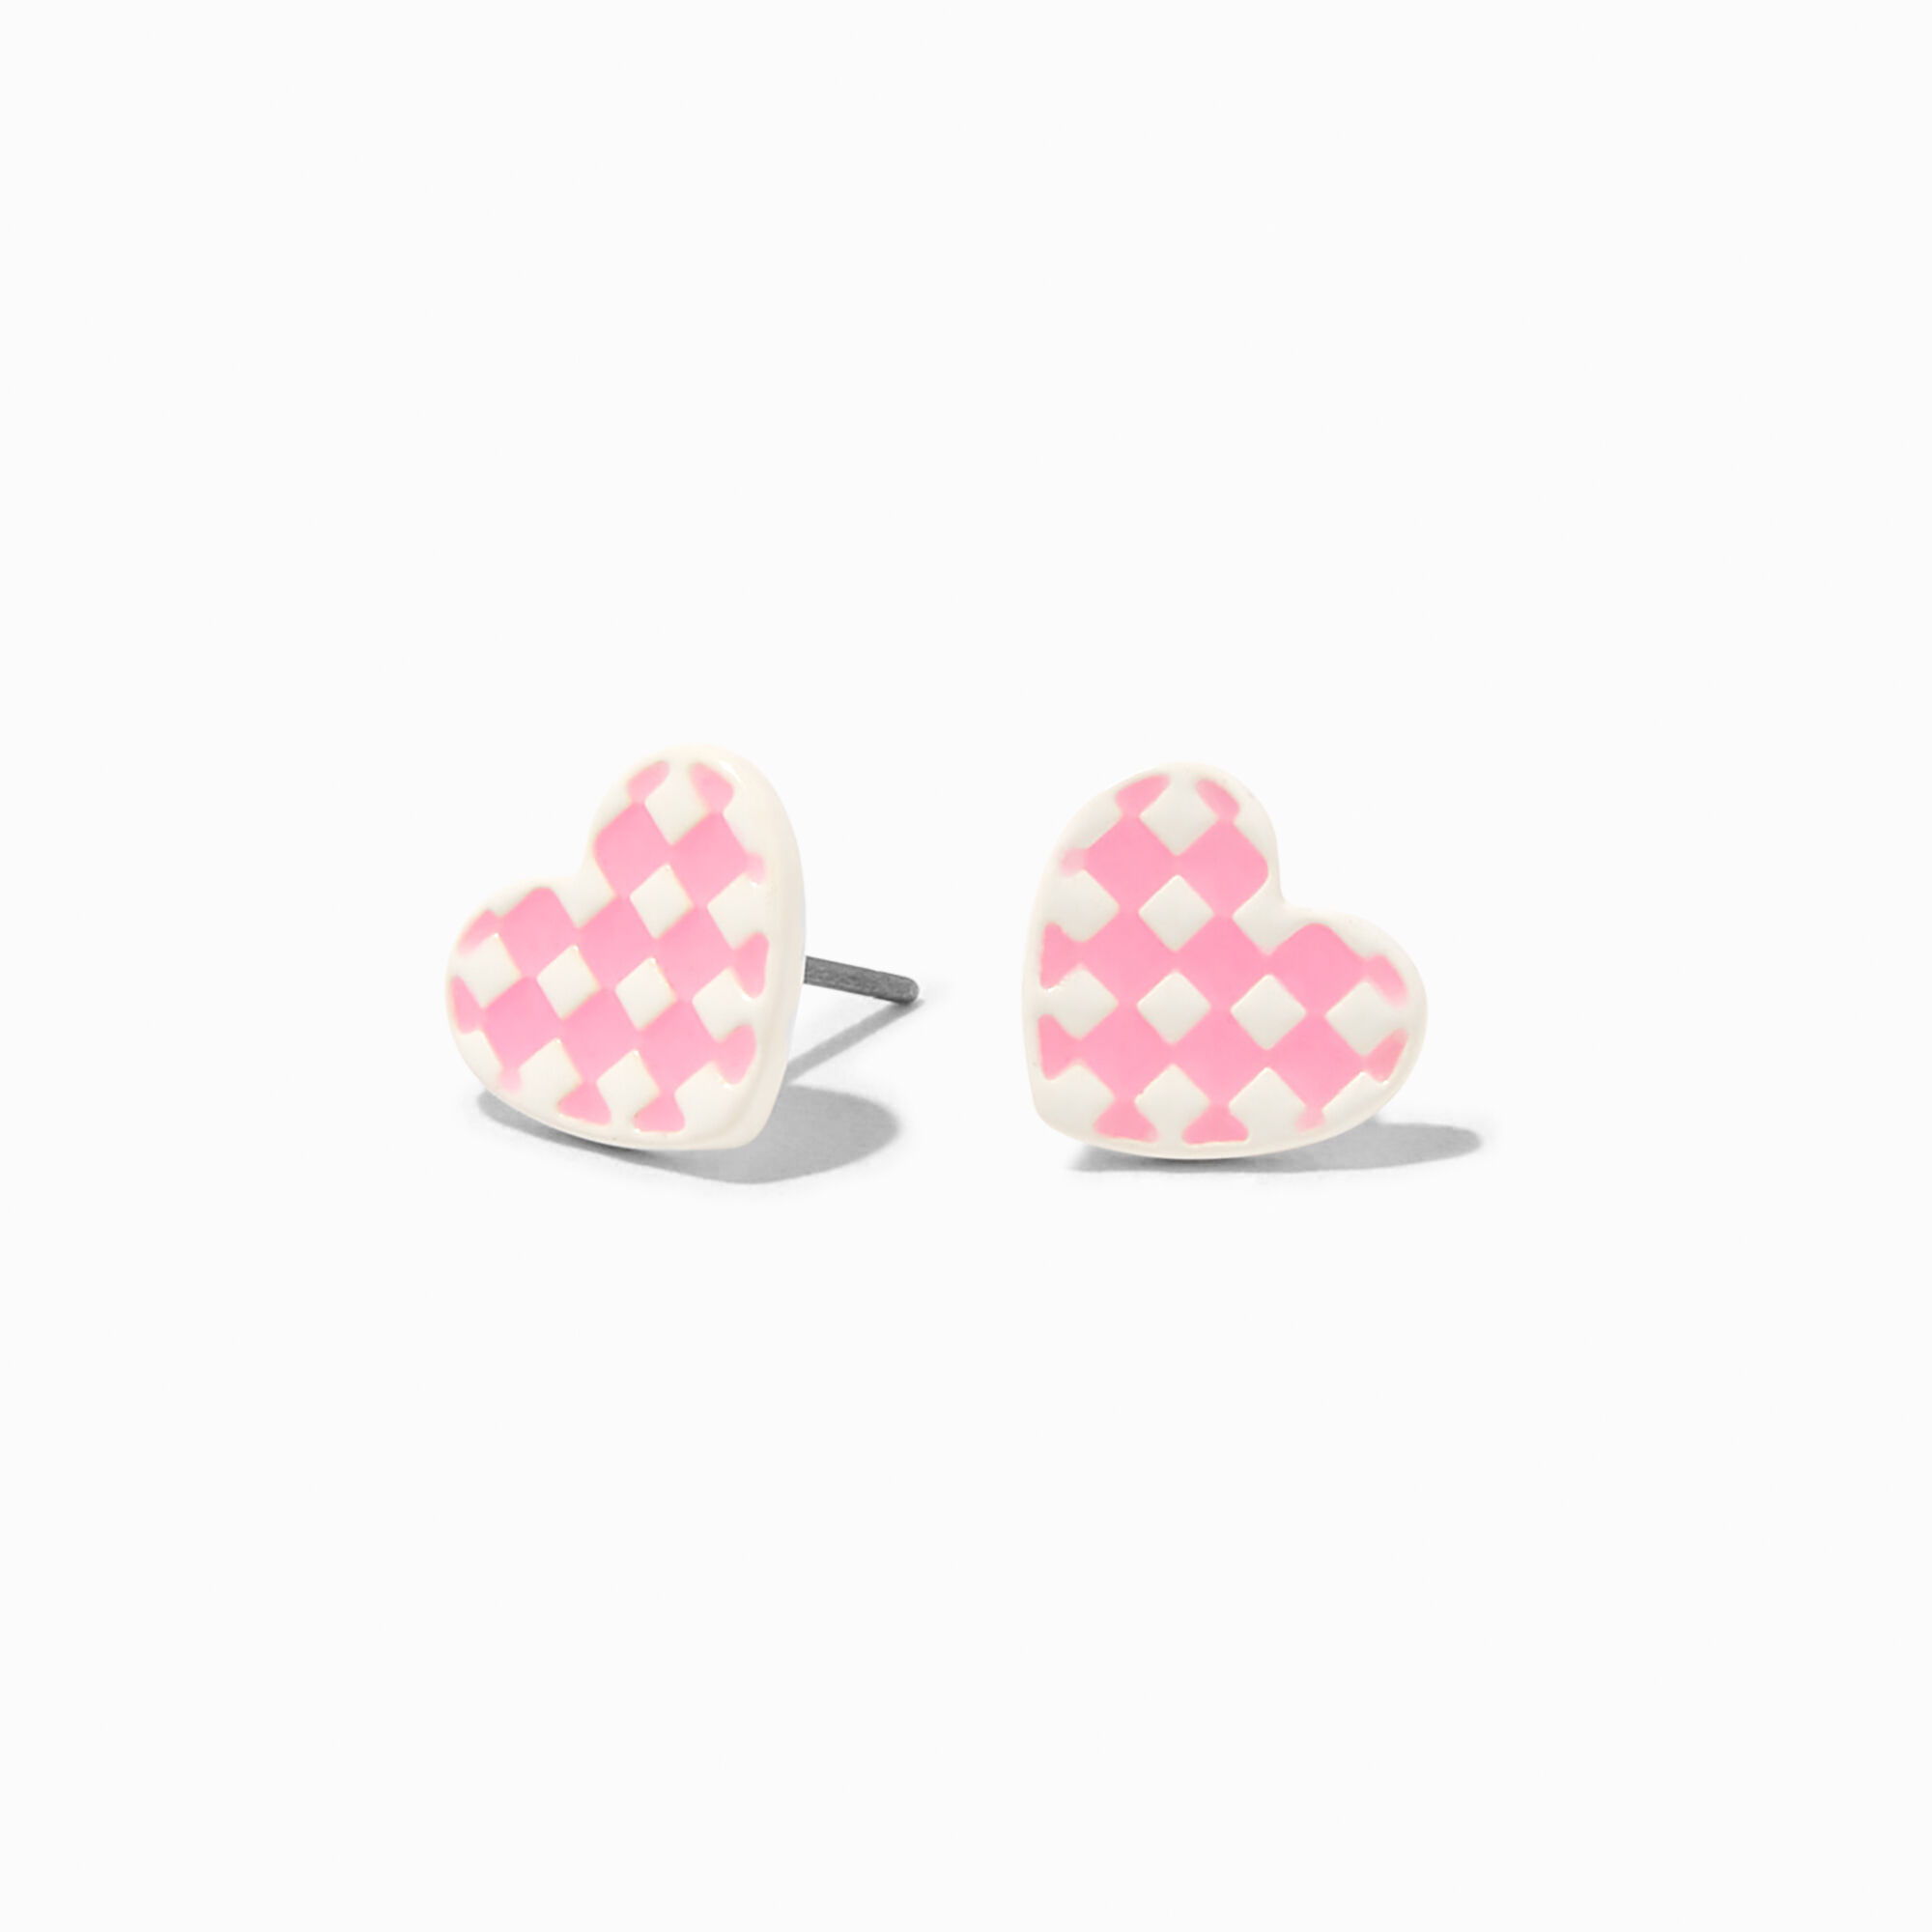 View Claires Glow In The Dark Checkered Heart Stud Earrings Pink information